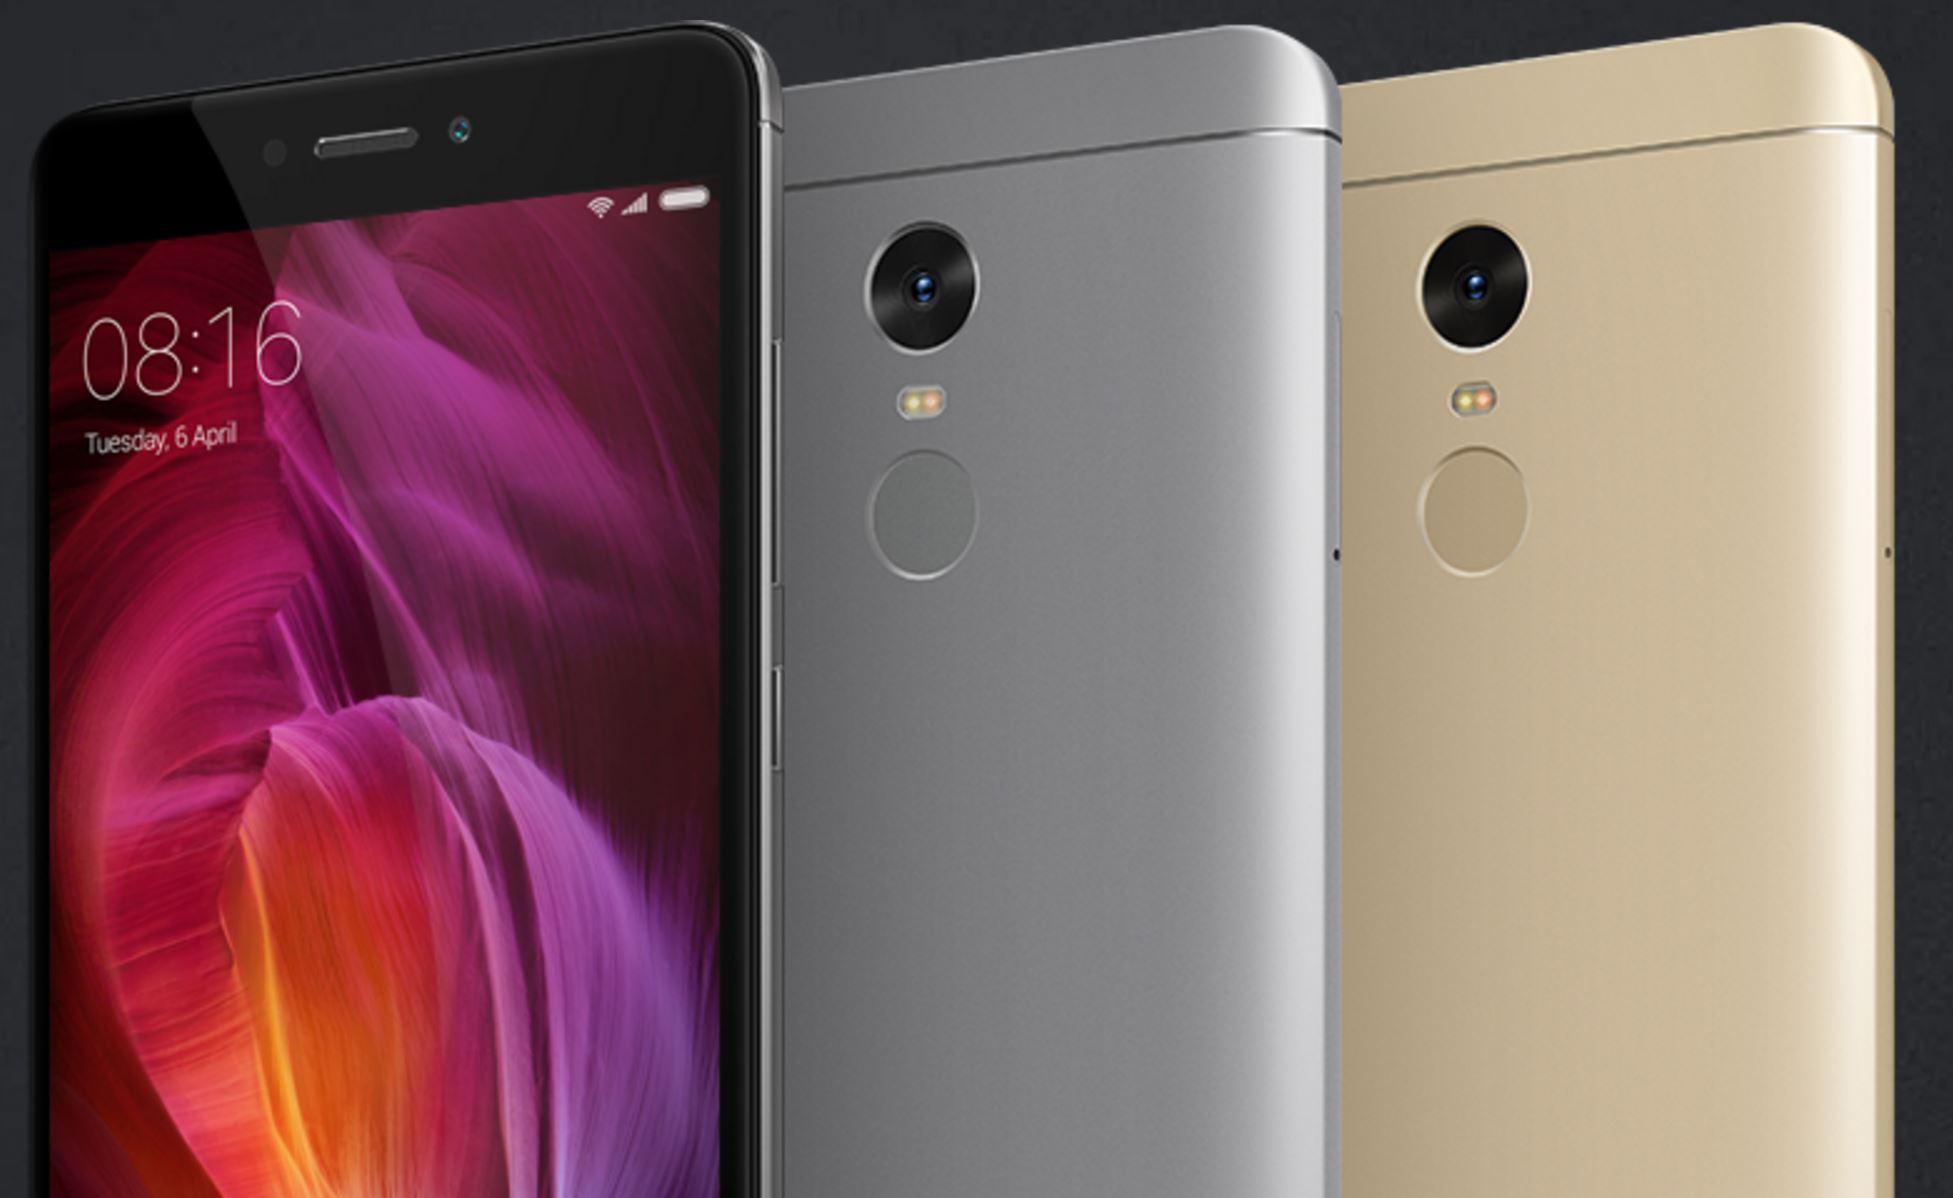 Xiaomi Redmi Note 4 Launched in India Starting @ INR 9999